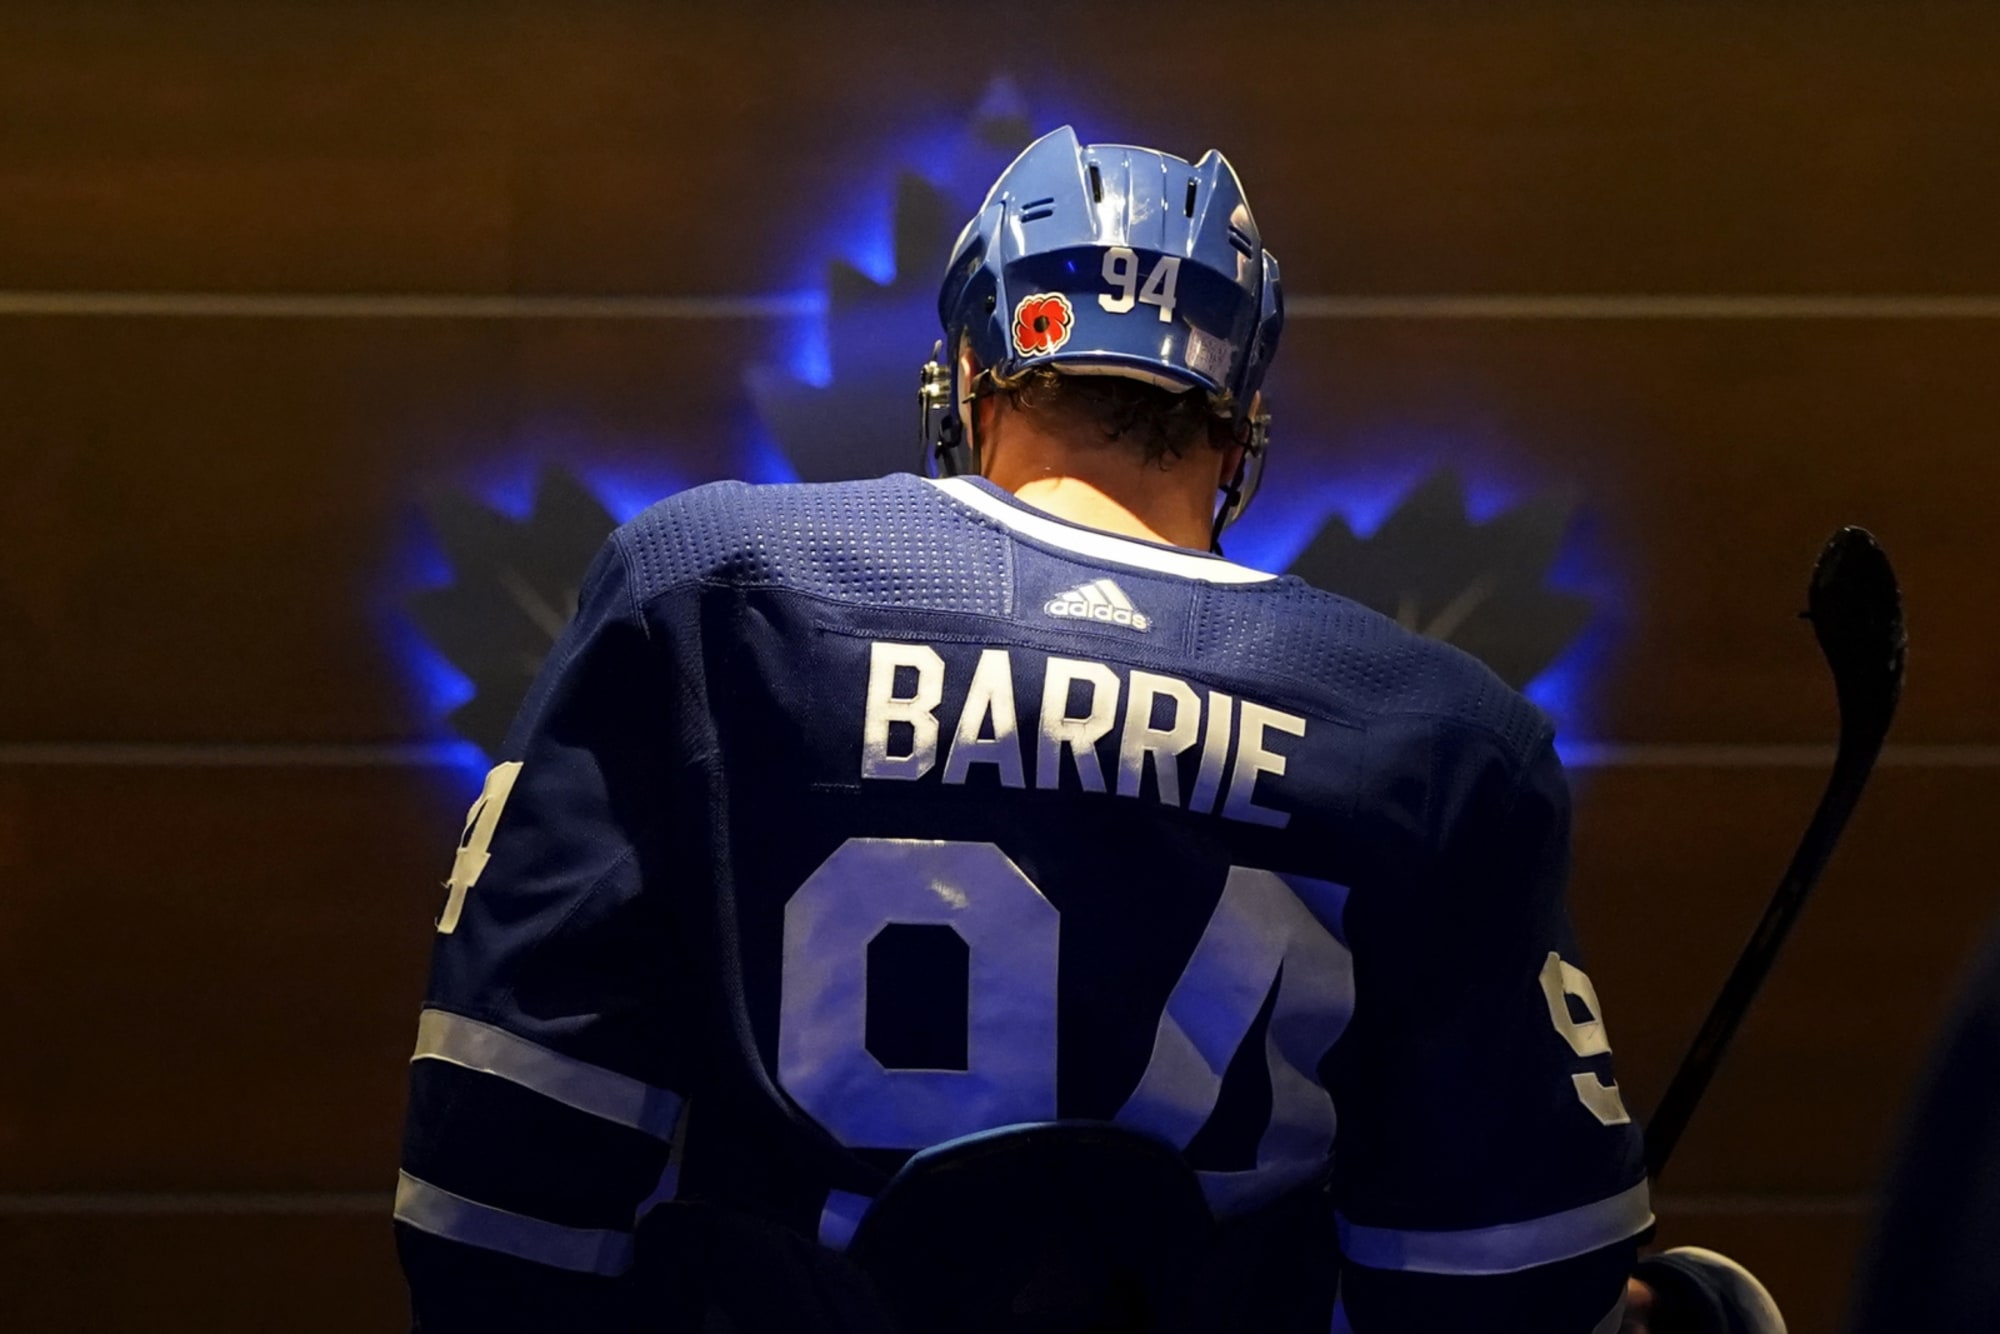 TSN on X: The Toronto Maple Leafs have acquired Tyson Barrie, Alex Kerfoot  and a 2020 6th round pick from the Colorado Avalanche in exchange for Nazem  Kadri, Calle Rosen and a